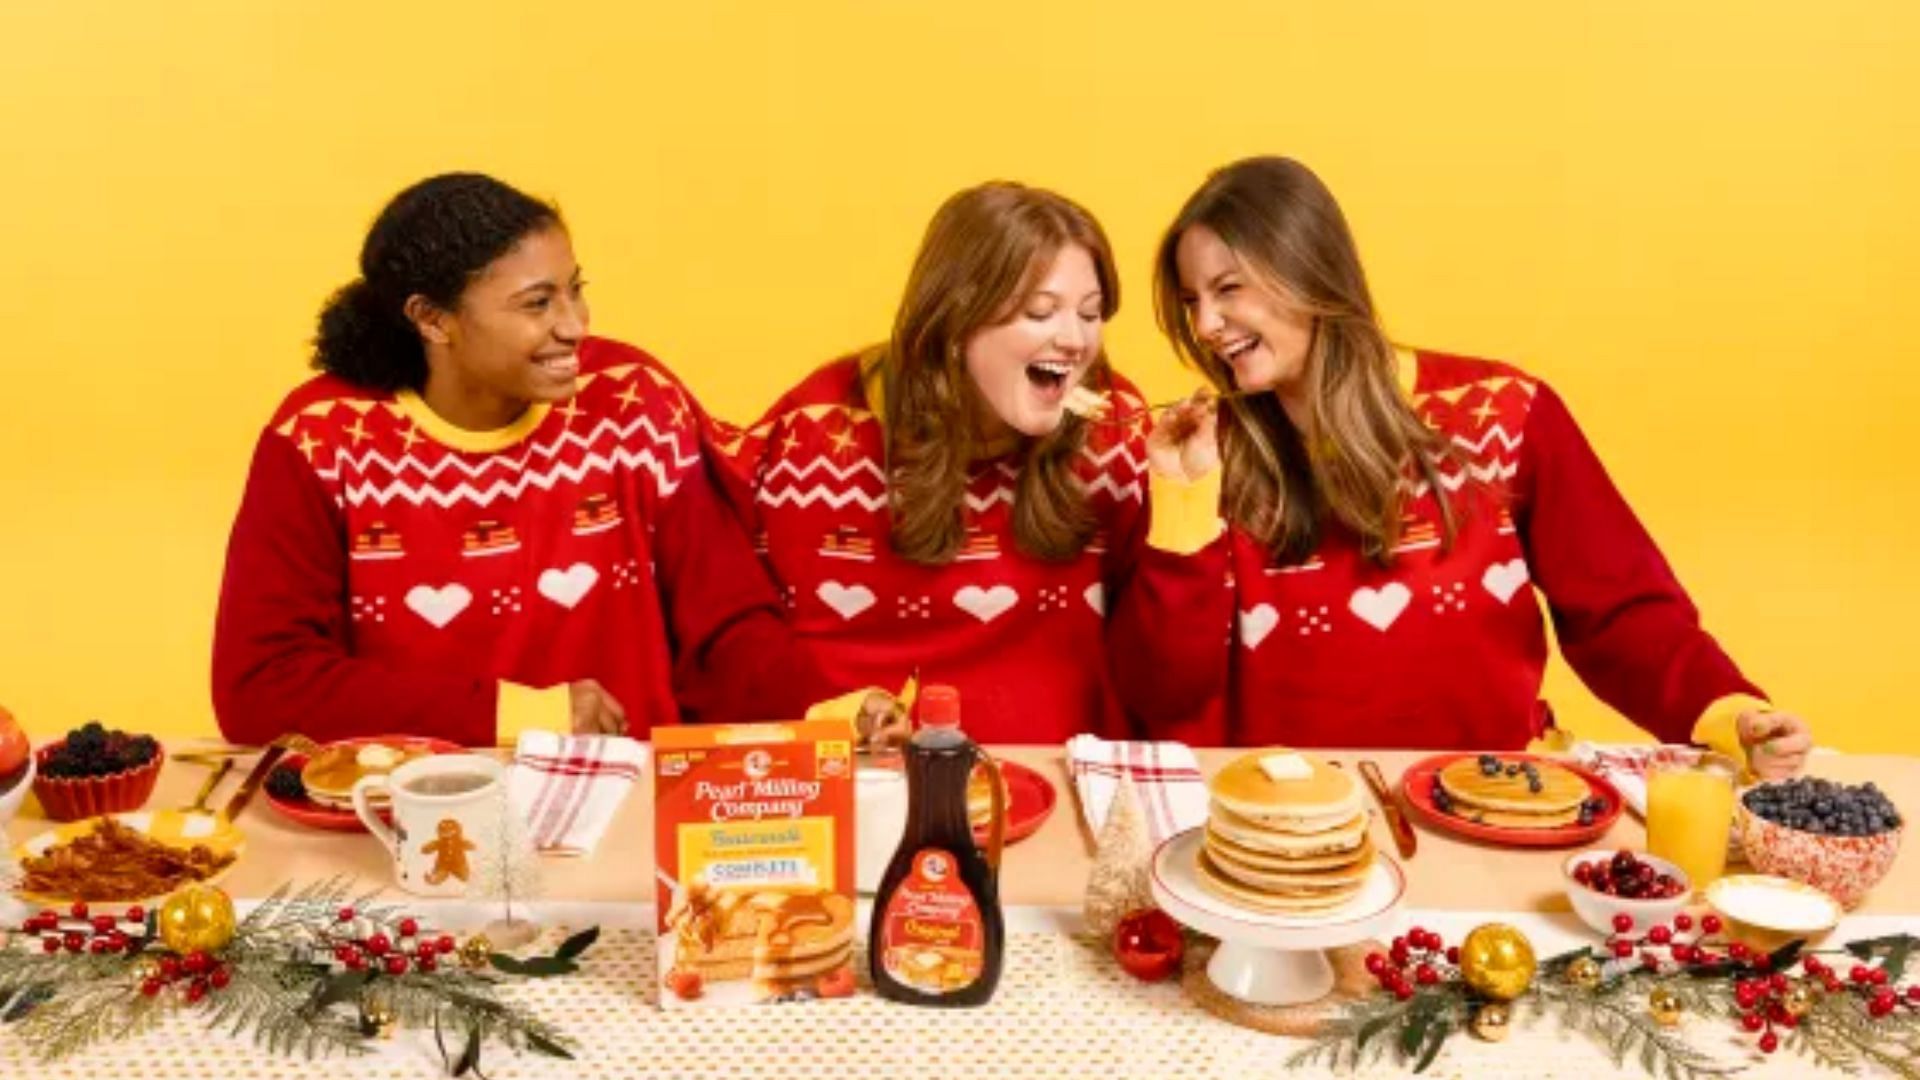 Gift a stack sweater to a friend (Image by Pearl Milling Company)